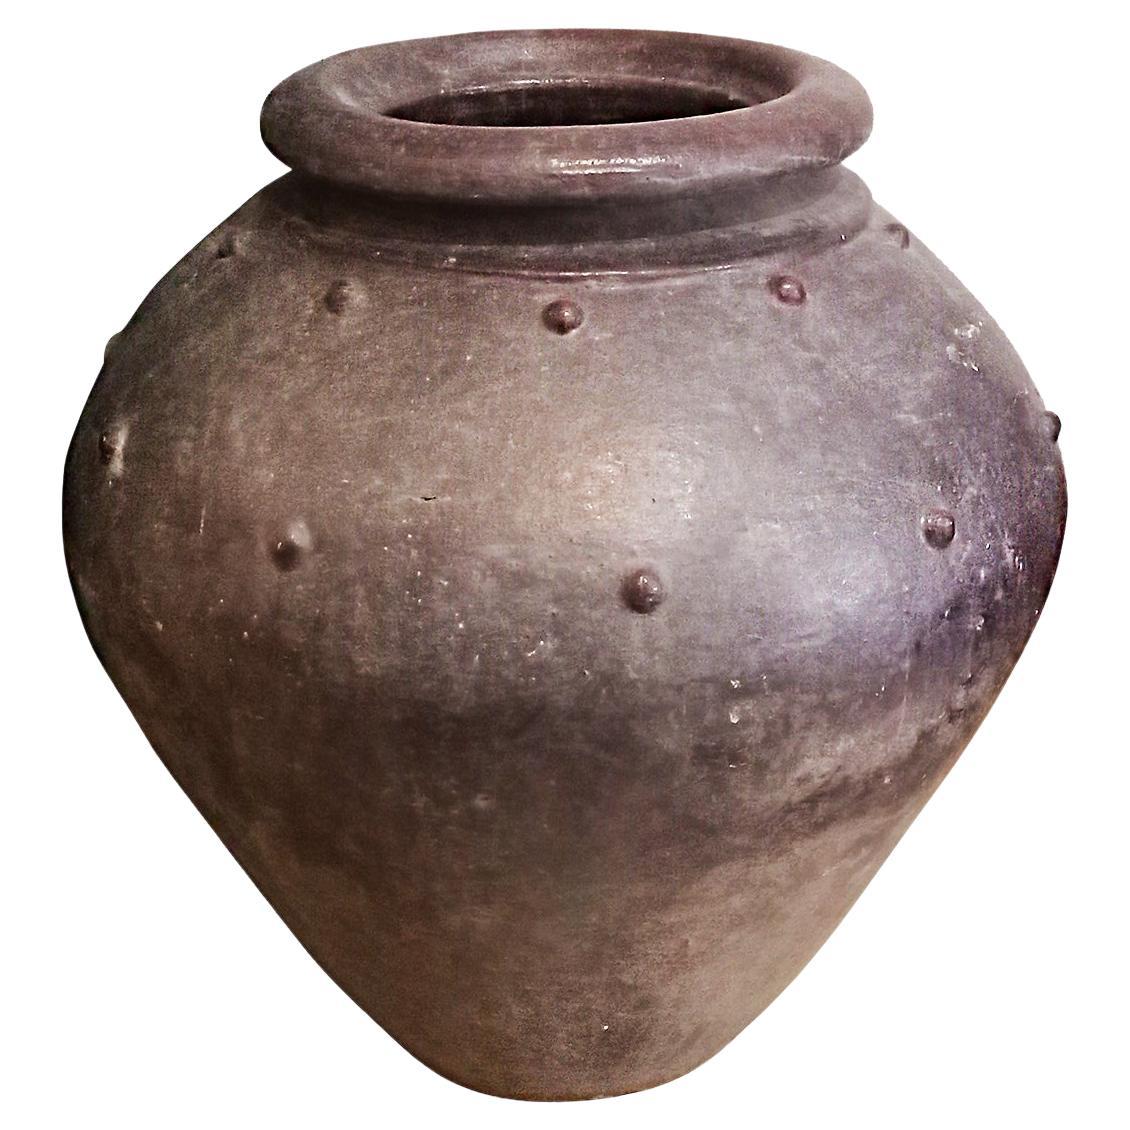 A large terracotta jar, hand-crafted in small, artisanal kilns in Bali, Indonesia. Glazed in burgundy color, with protruding decorative dots. Narrow top and bottom (11 inches), with 18 inches in total diameter and 19 inches high. 

The bottom has a